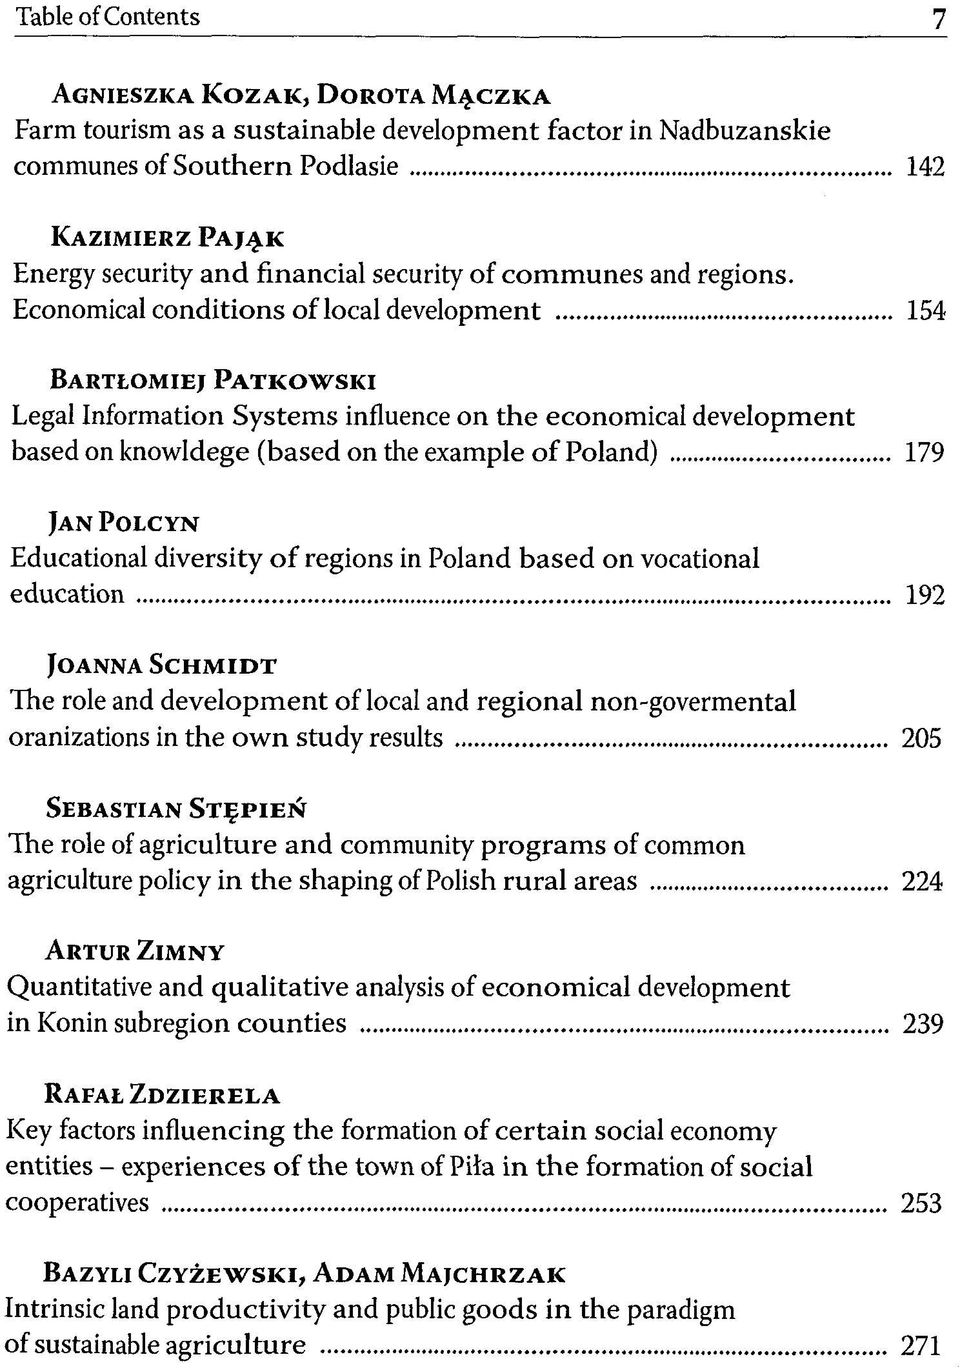 Economical conditions of local development 154 BARTLOMIEJ PATKOWSKI Legal Information Systems influence on the economical development based on knowldege (based on the example of Poland) 179 JAN